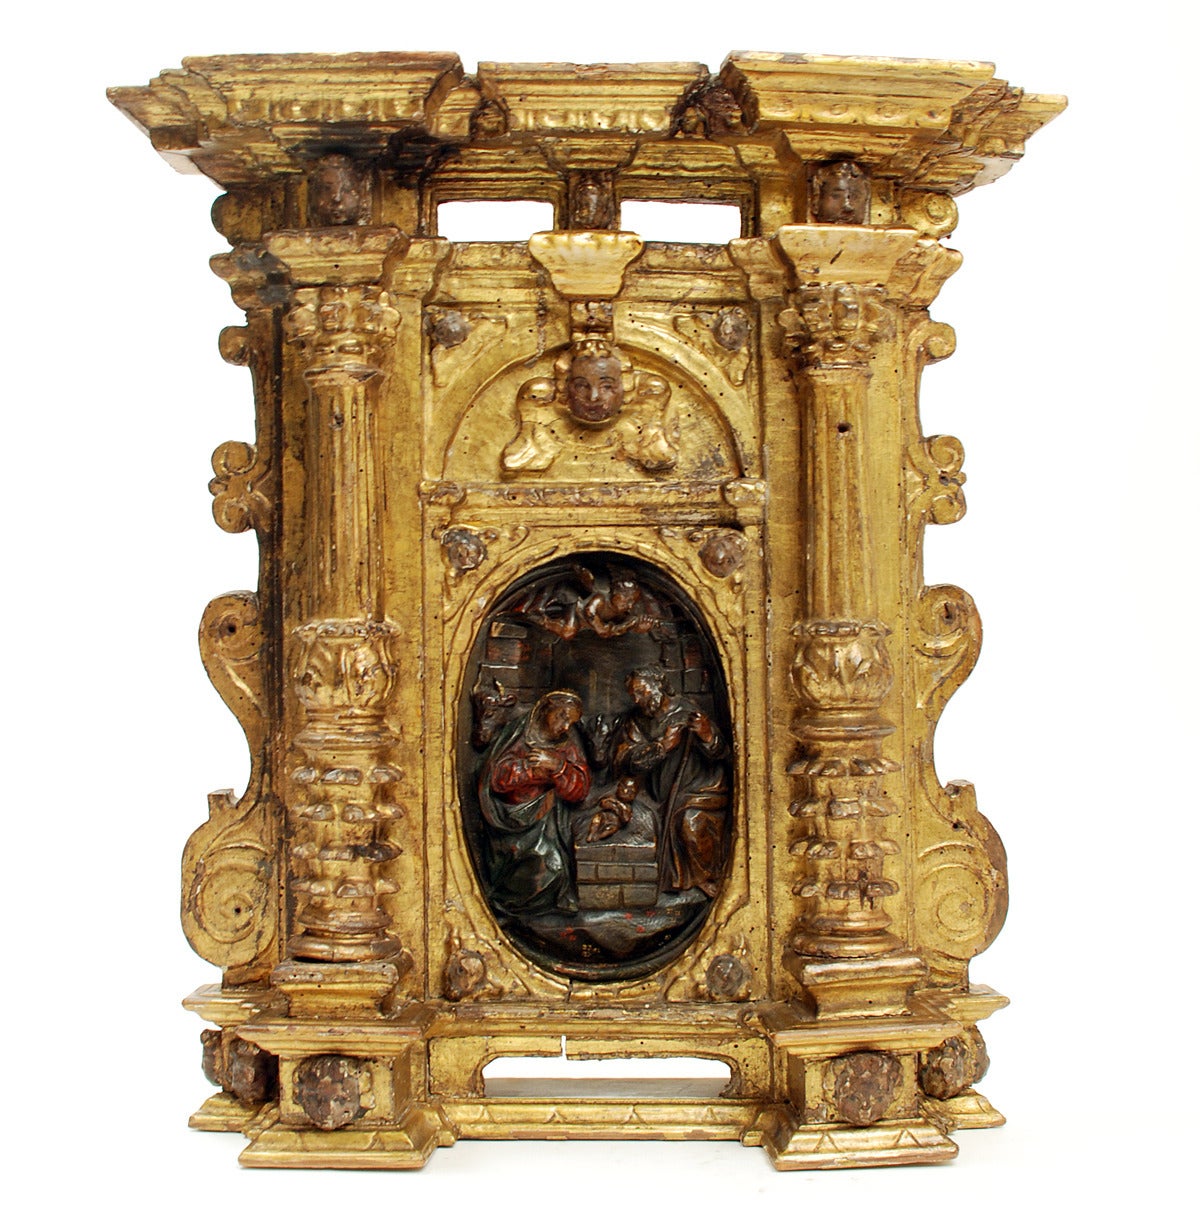 A stunning 17th century Sicilian mecca giltwood tabernacle with original hand-carved and polychrome painted nativity, flanked by a pair of columns and surmounted by cherubs and a molded frieze.

Dimensions: 20 inches vertical x 18 inches